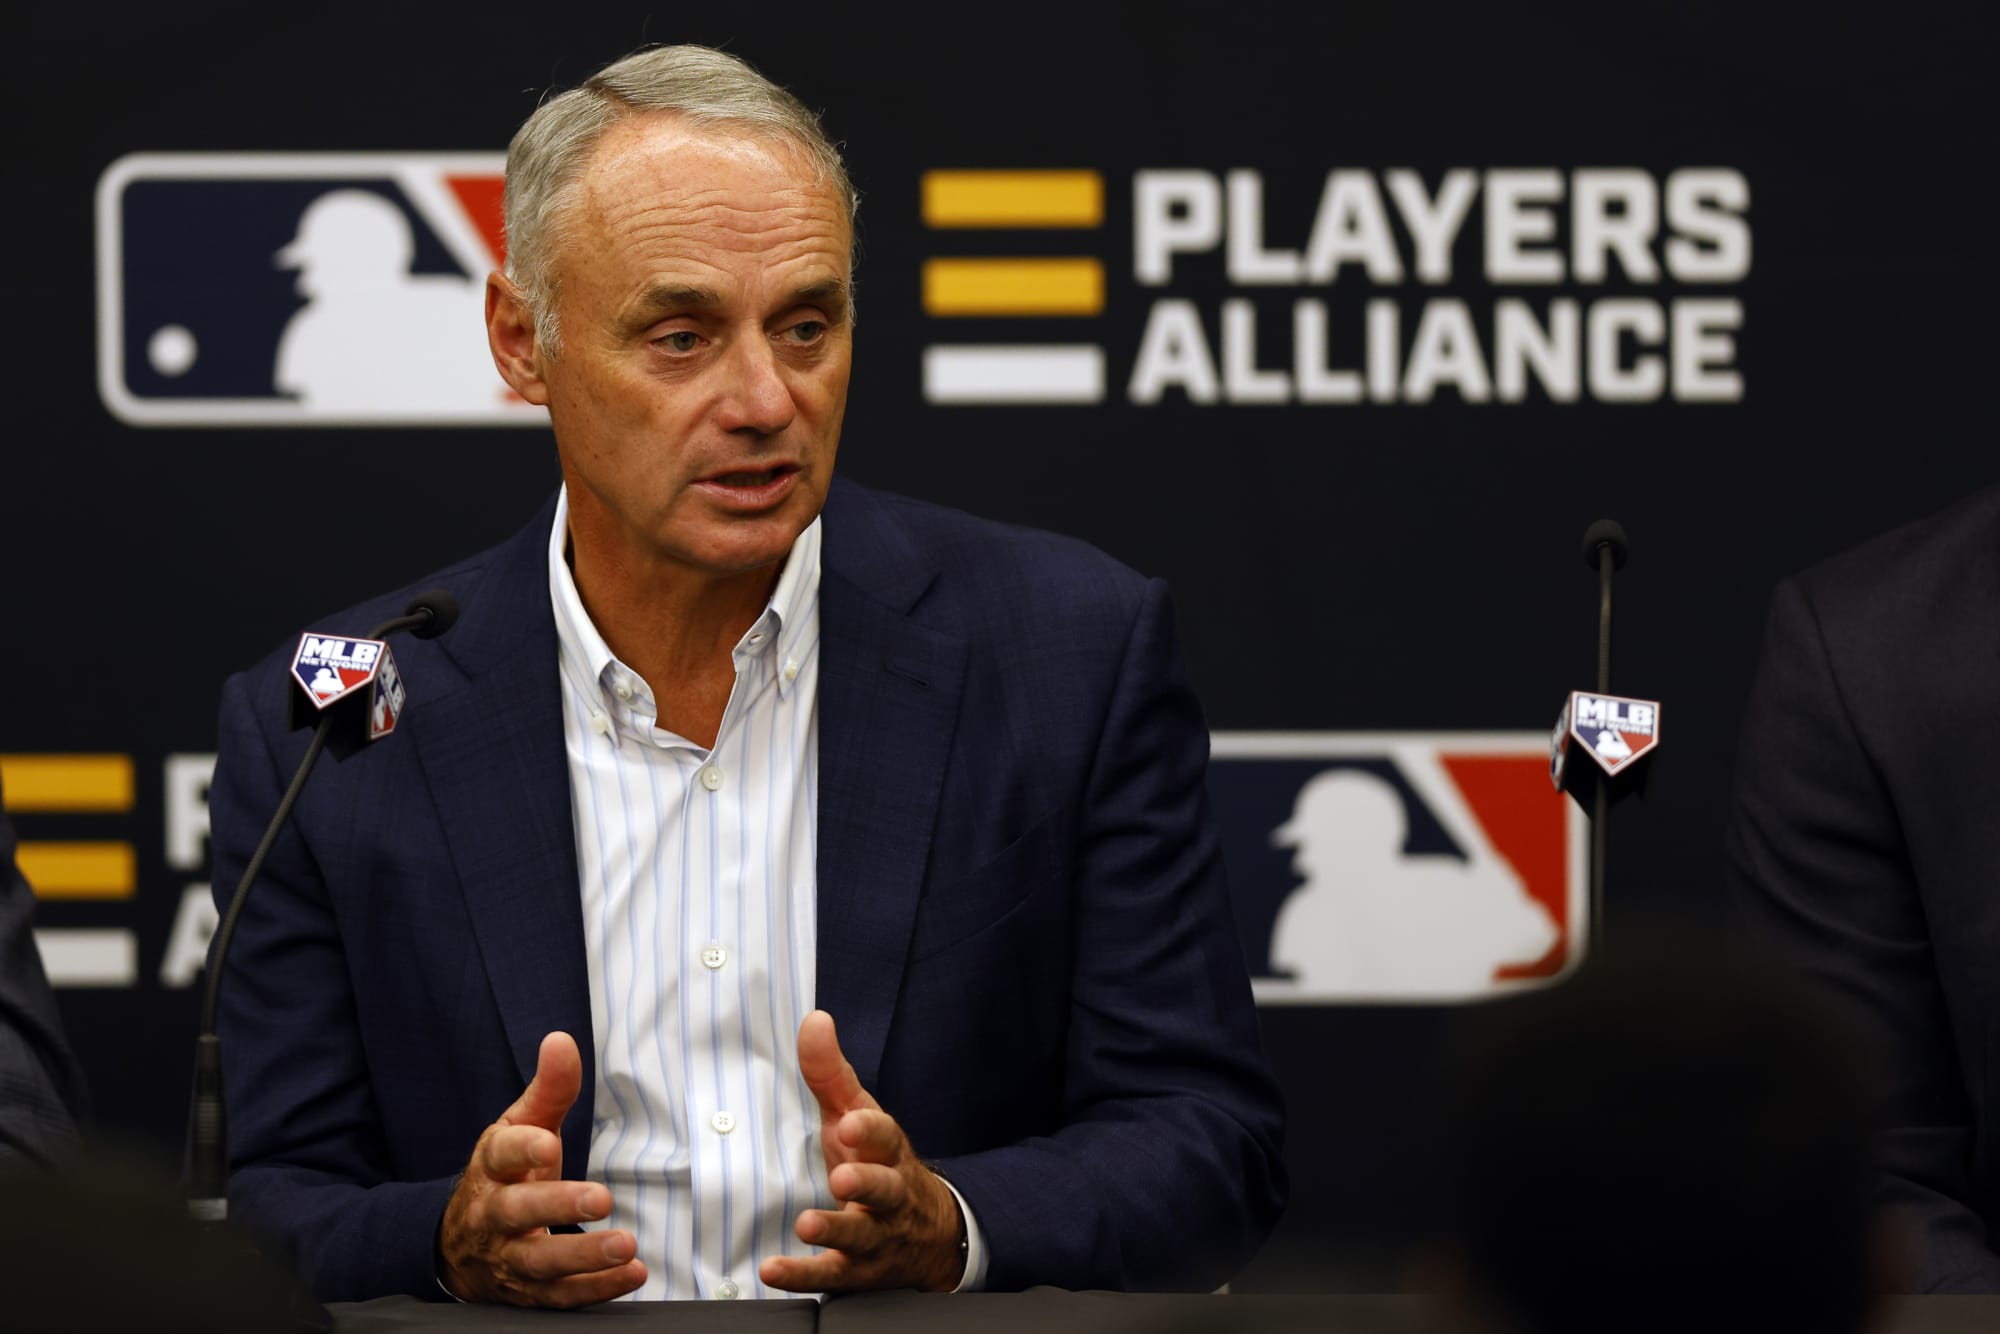 Cancelling more spring training games is a bad look for MLB